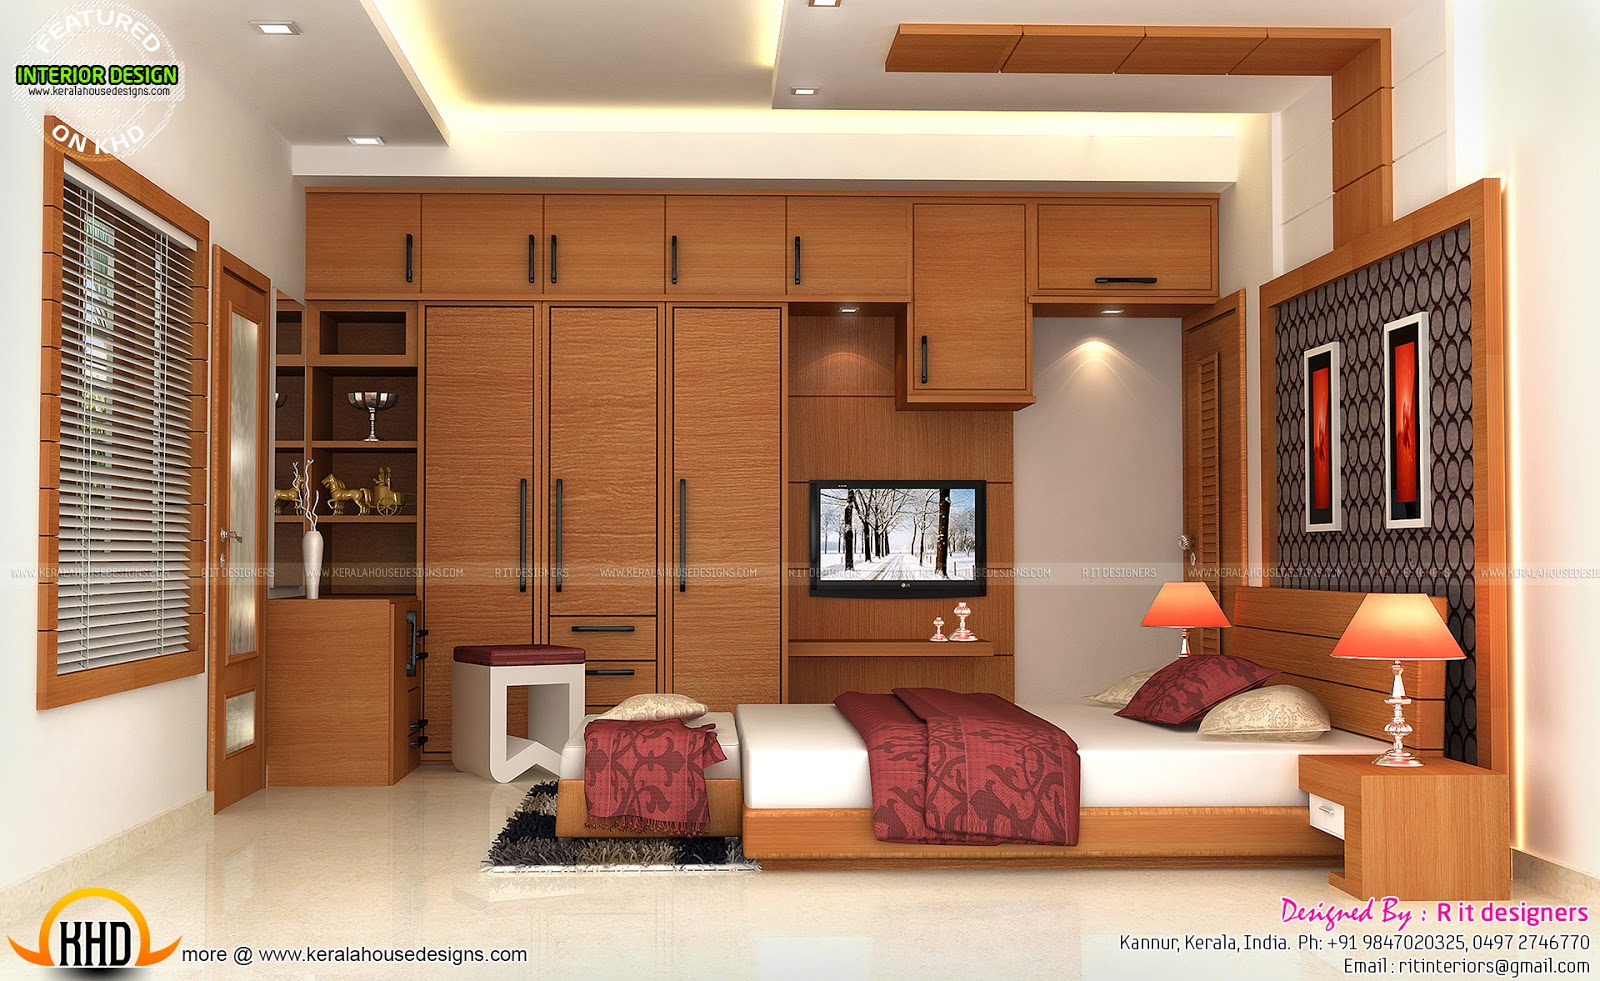 Interiors of bedrooms  and kitchen Kerala home  design  and 